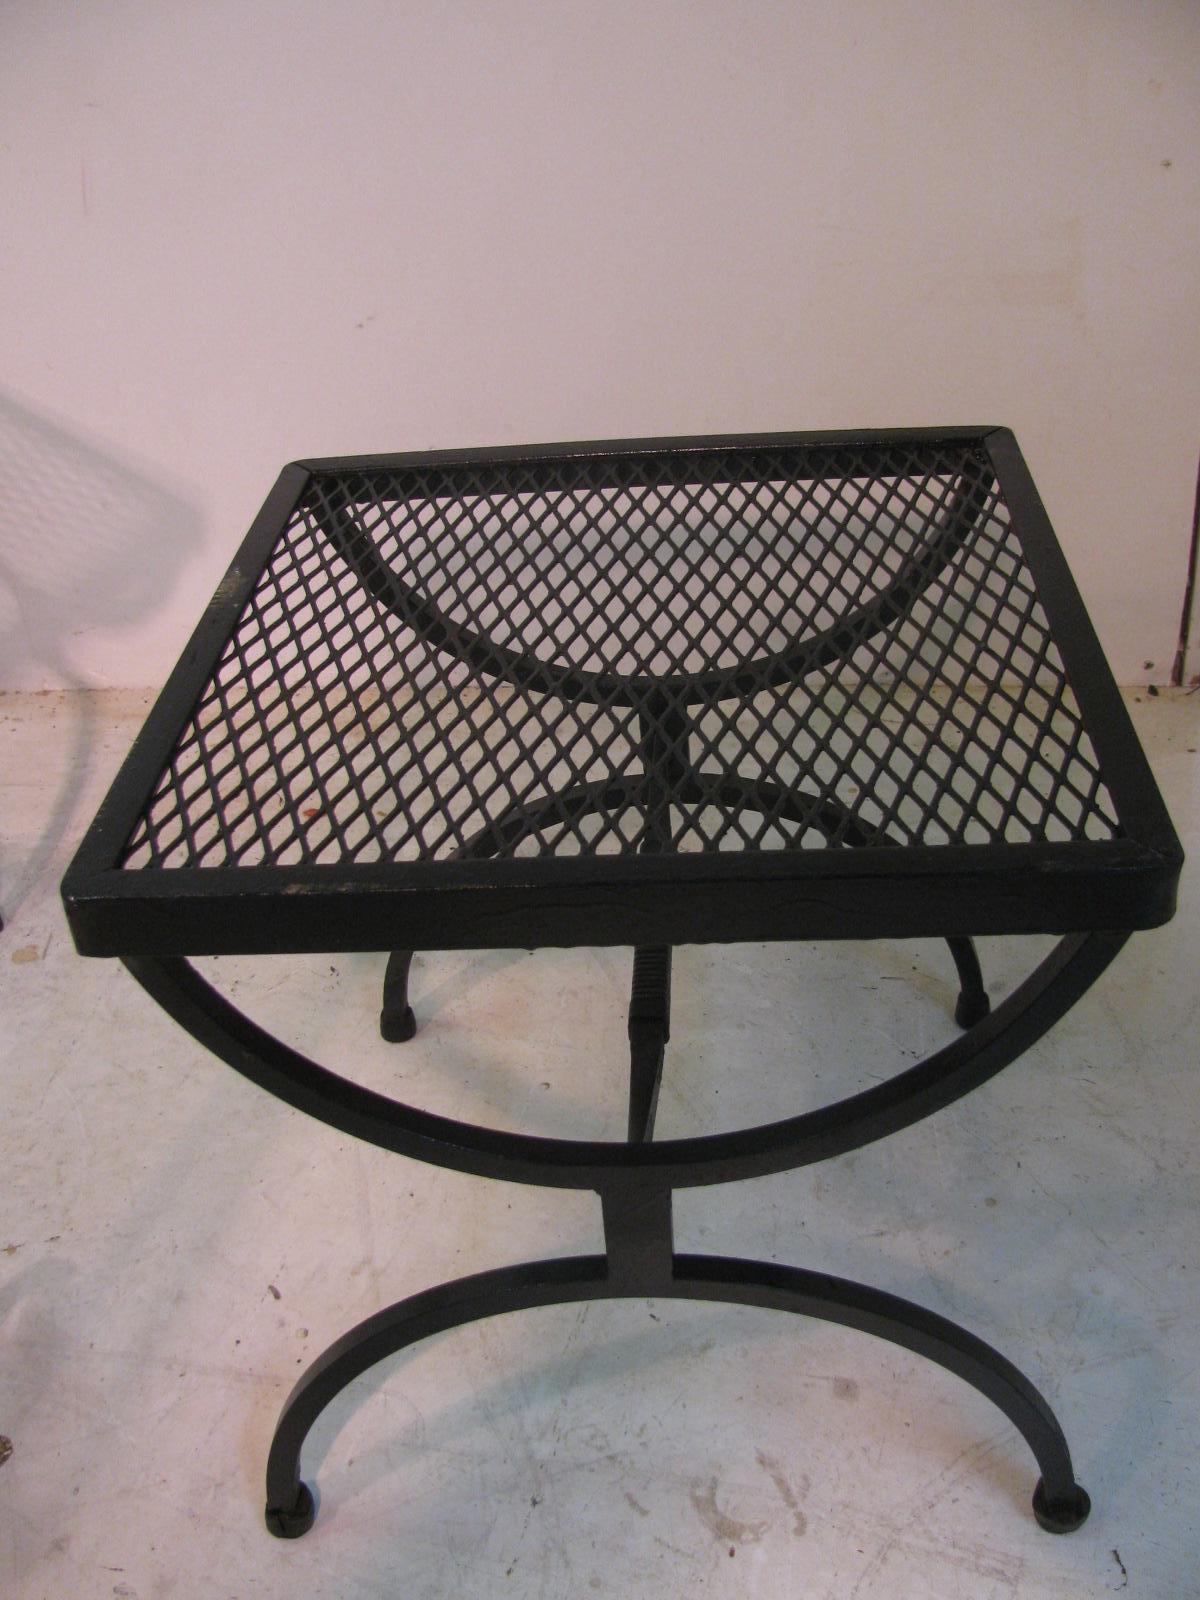 Simple three-piece set which is diminutive in size but works well with the Sculptura set that it came with. Two end tables and a cocktail table with mesh tops freshly sprayed black, its original color. Measures: End tables are 14 x 14 x 14.75 H,